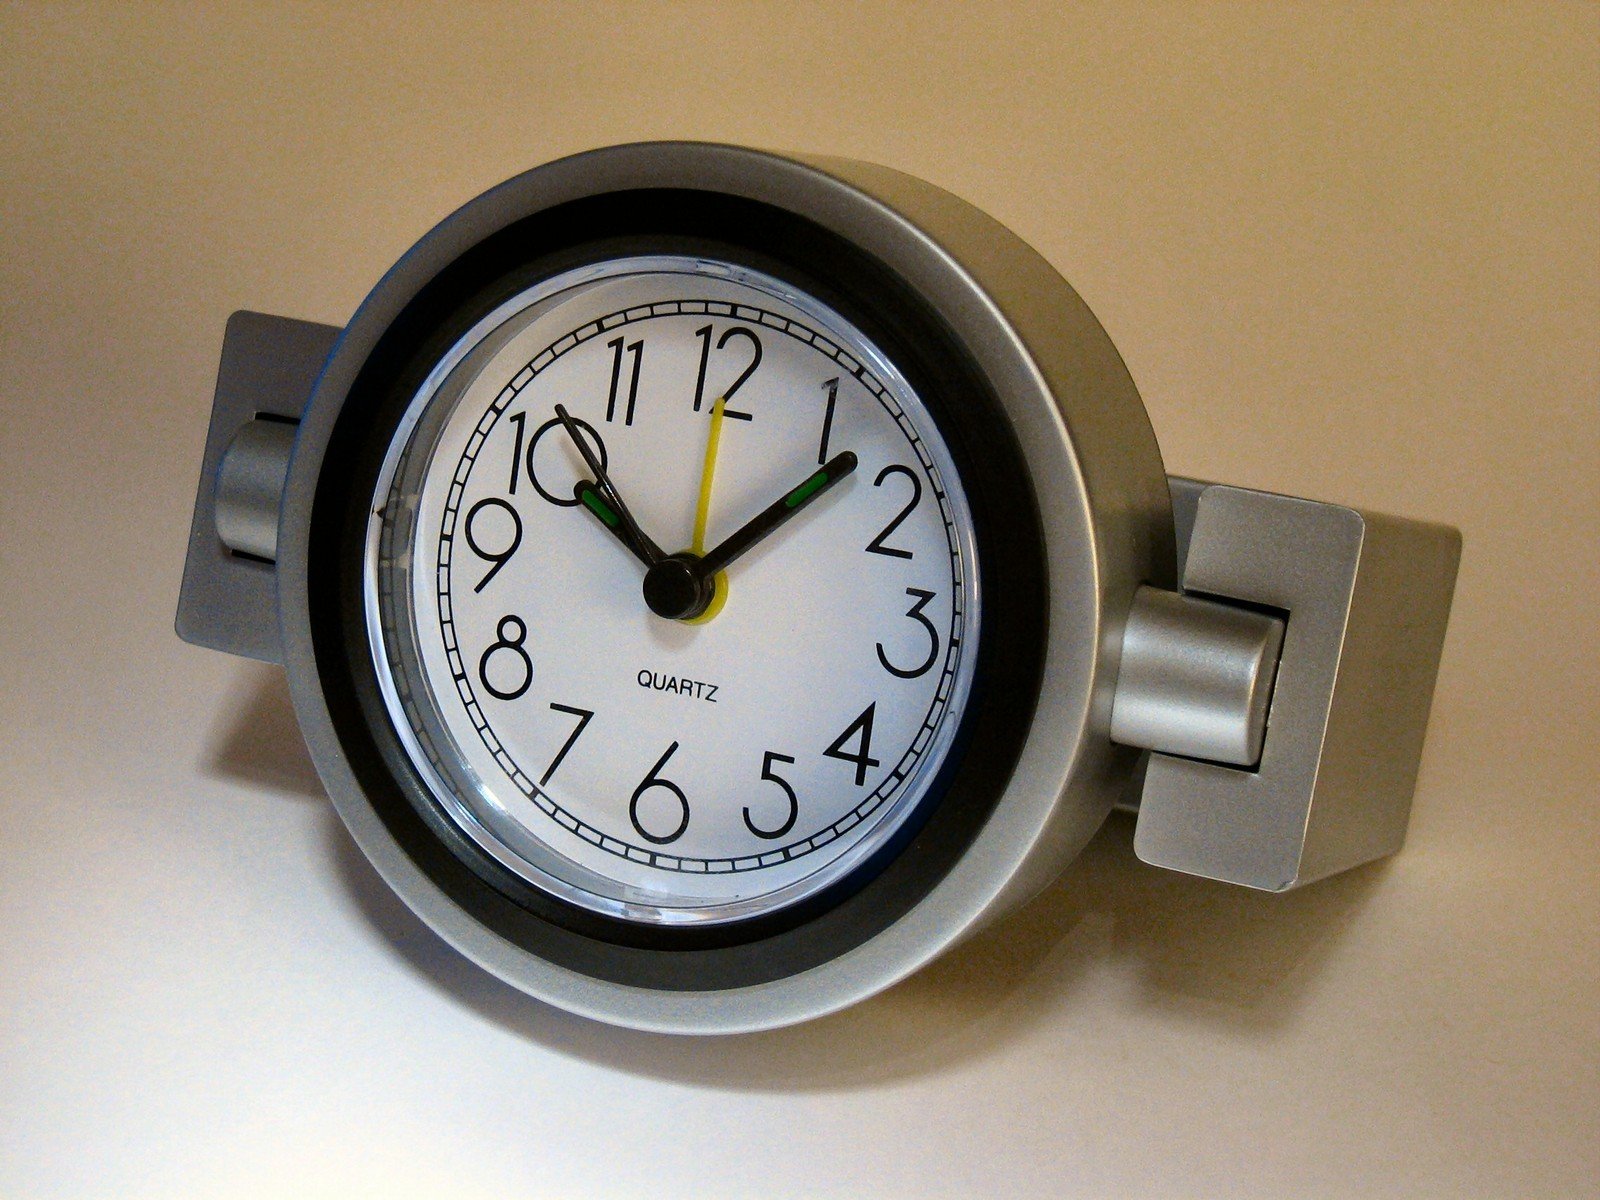 an analog clock mounted to the wall in the room